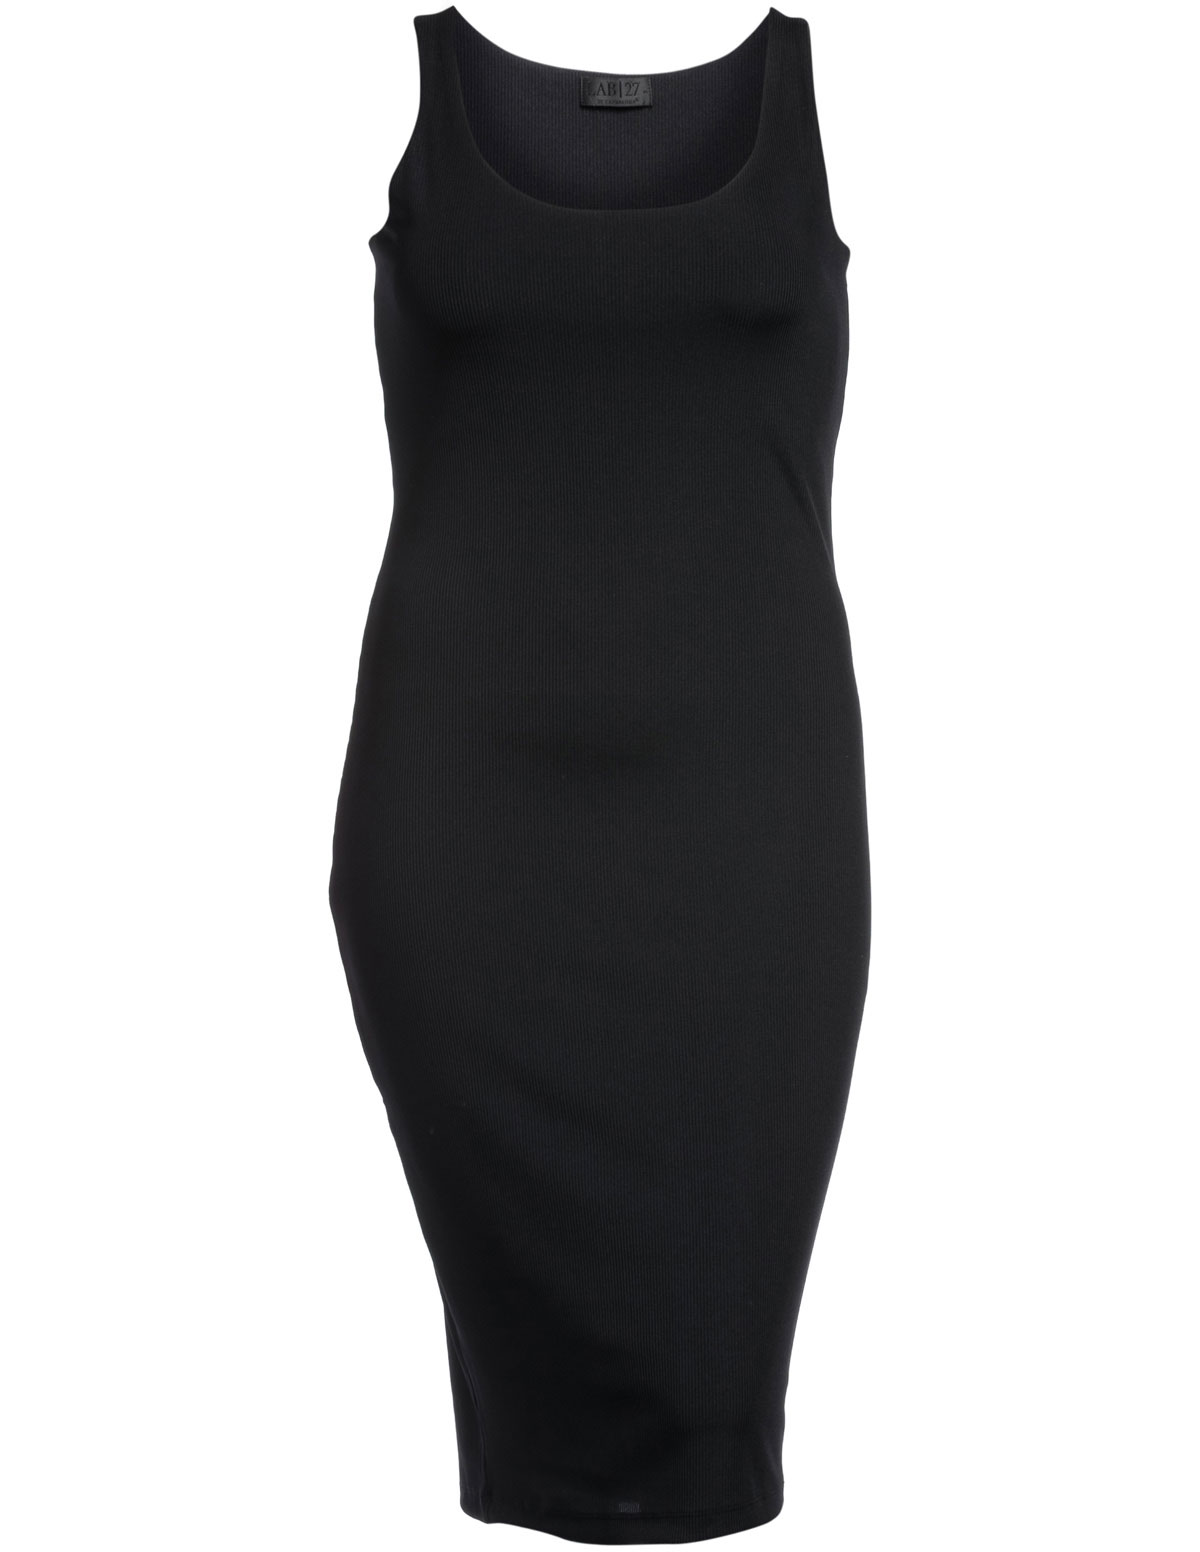 Ribbed dress in Black designed by Carmakoma to find in Category Dresses at navabi.de